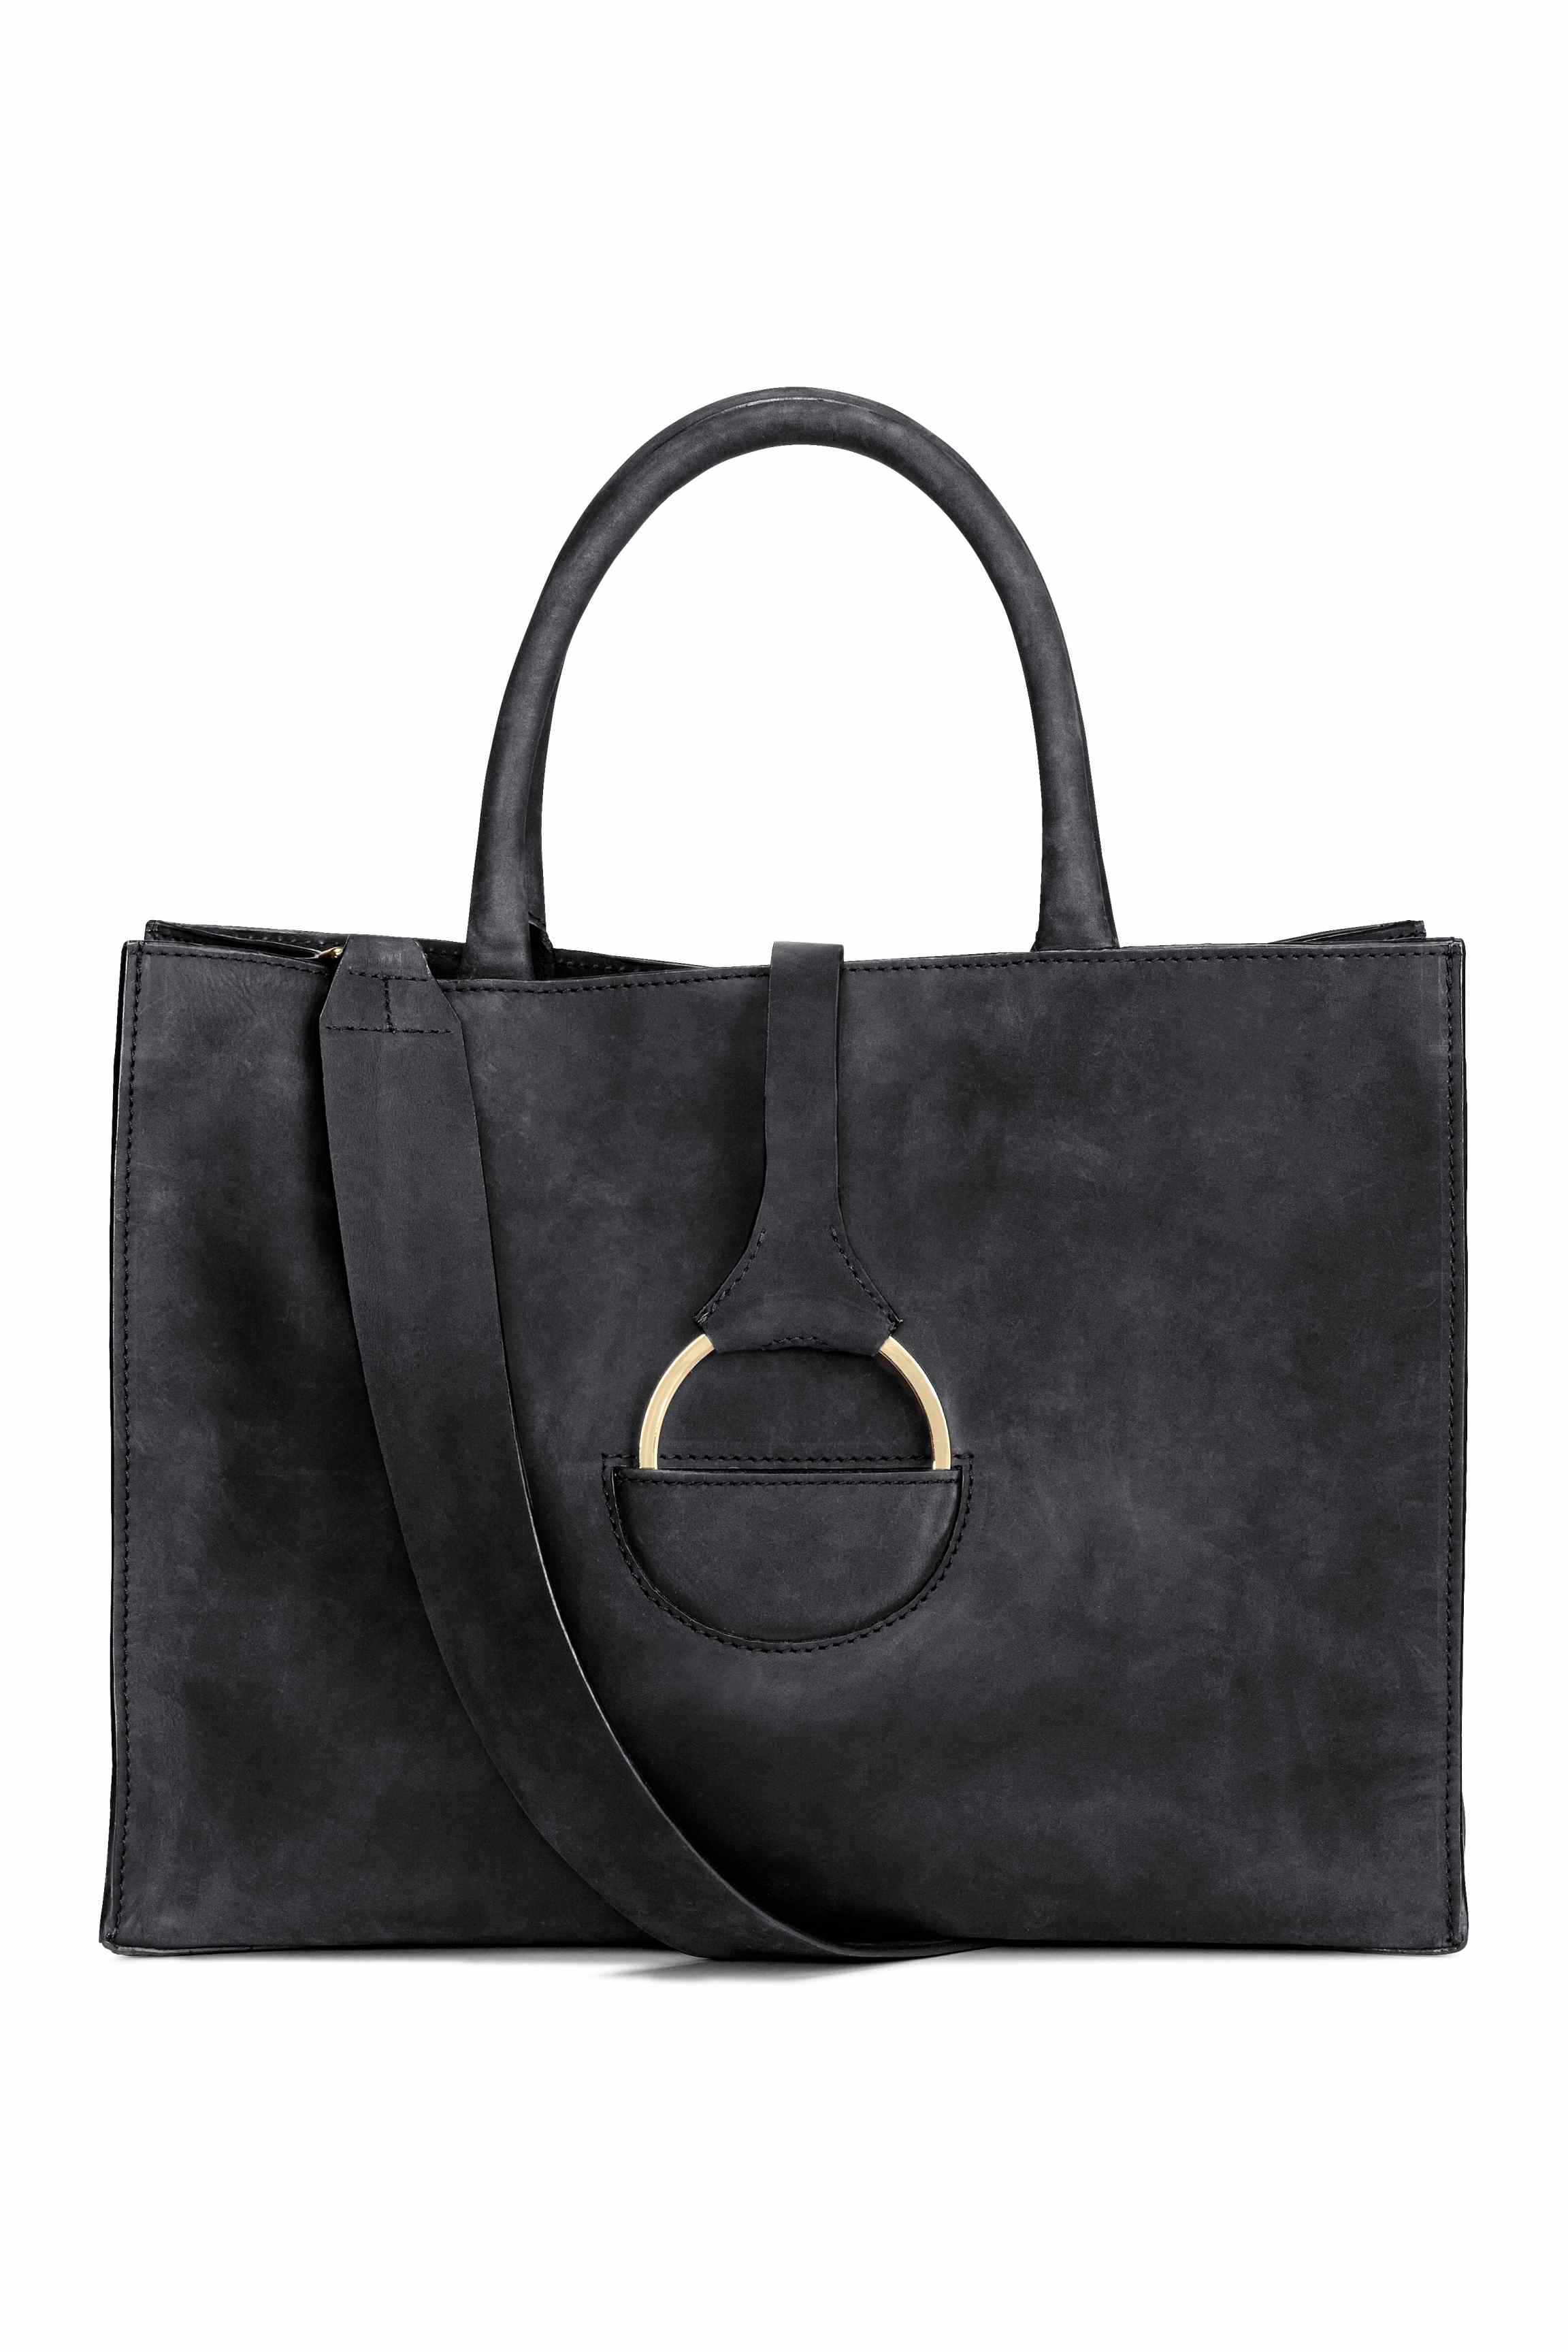 H&M Cotton Leather Tote Bag in Black - Lyst